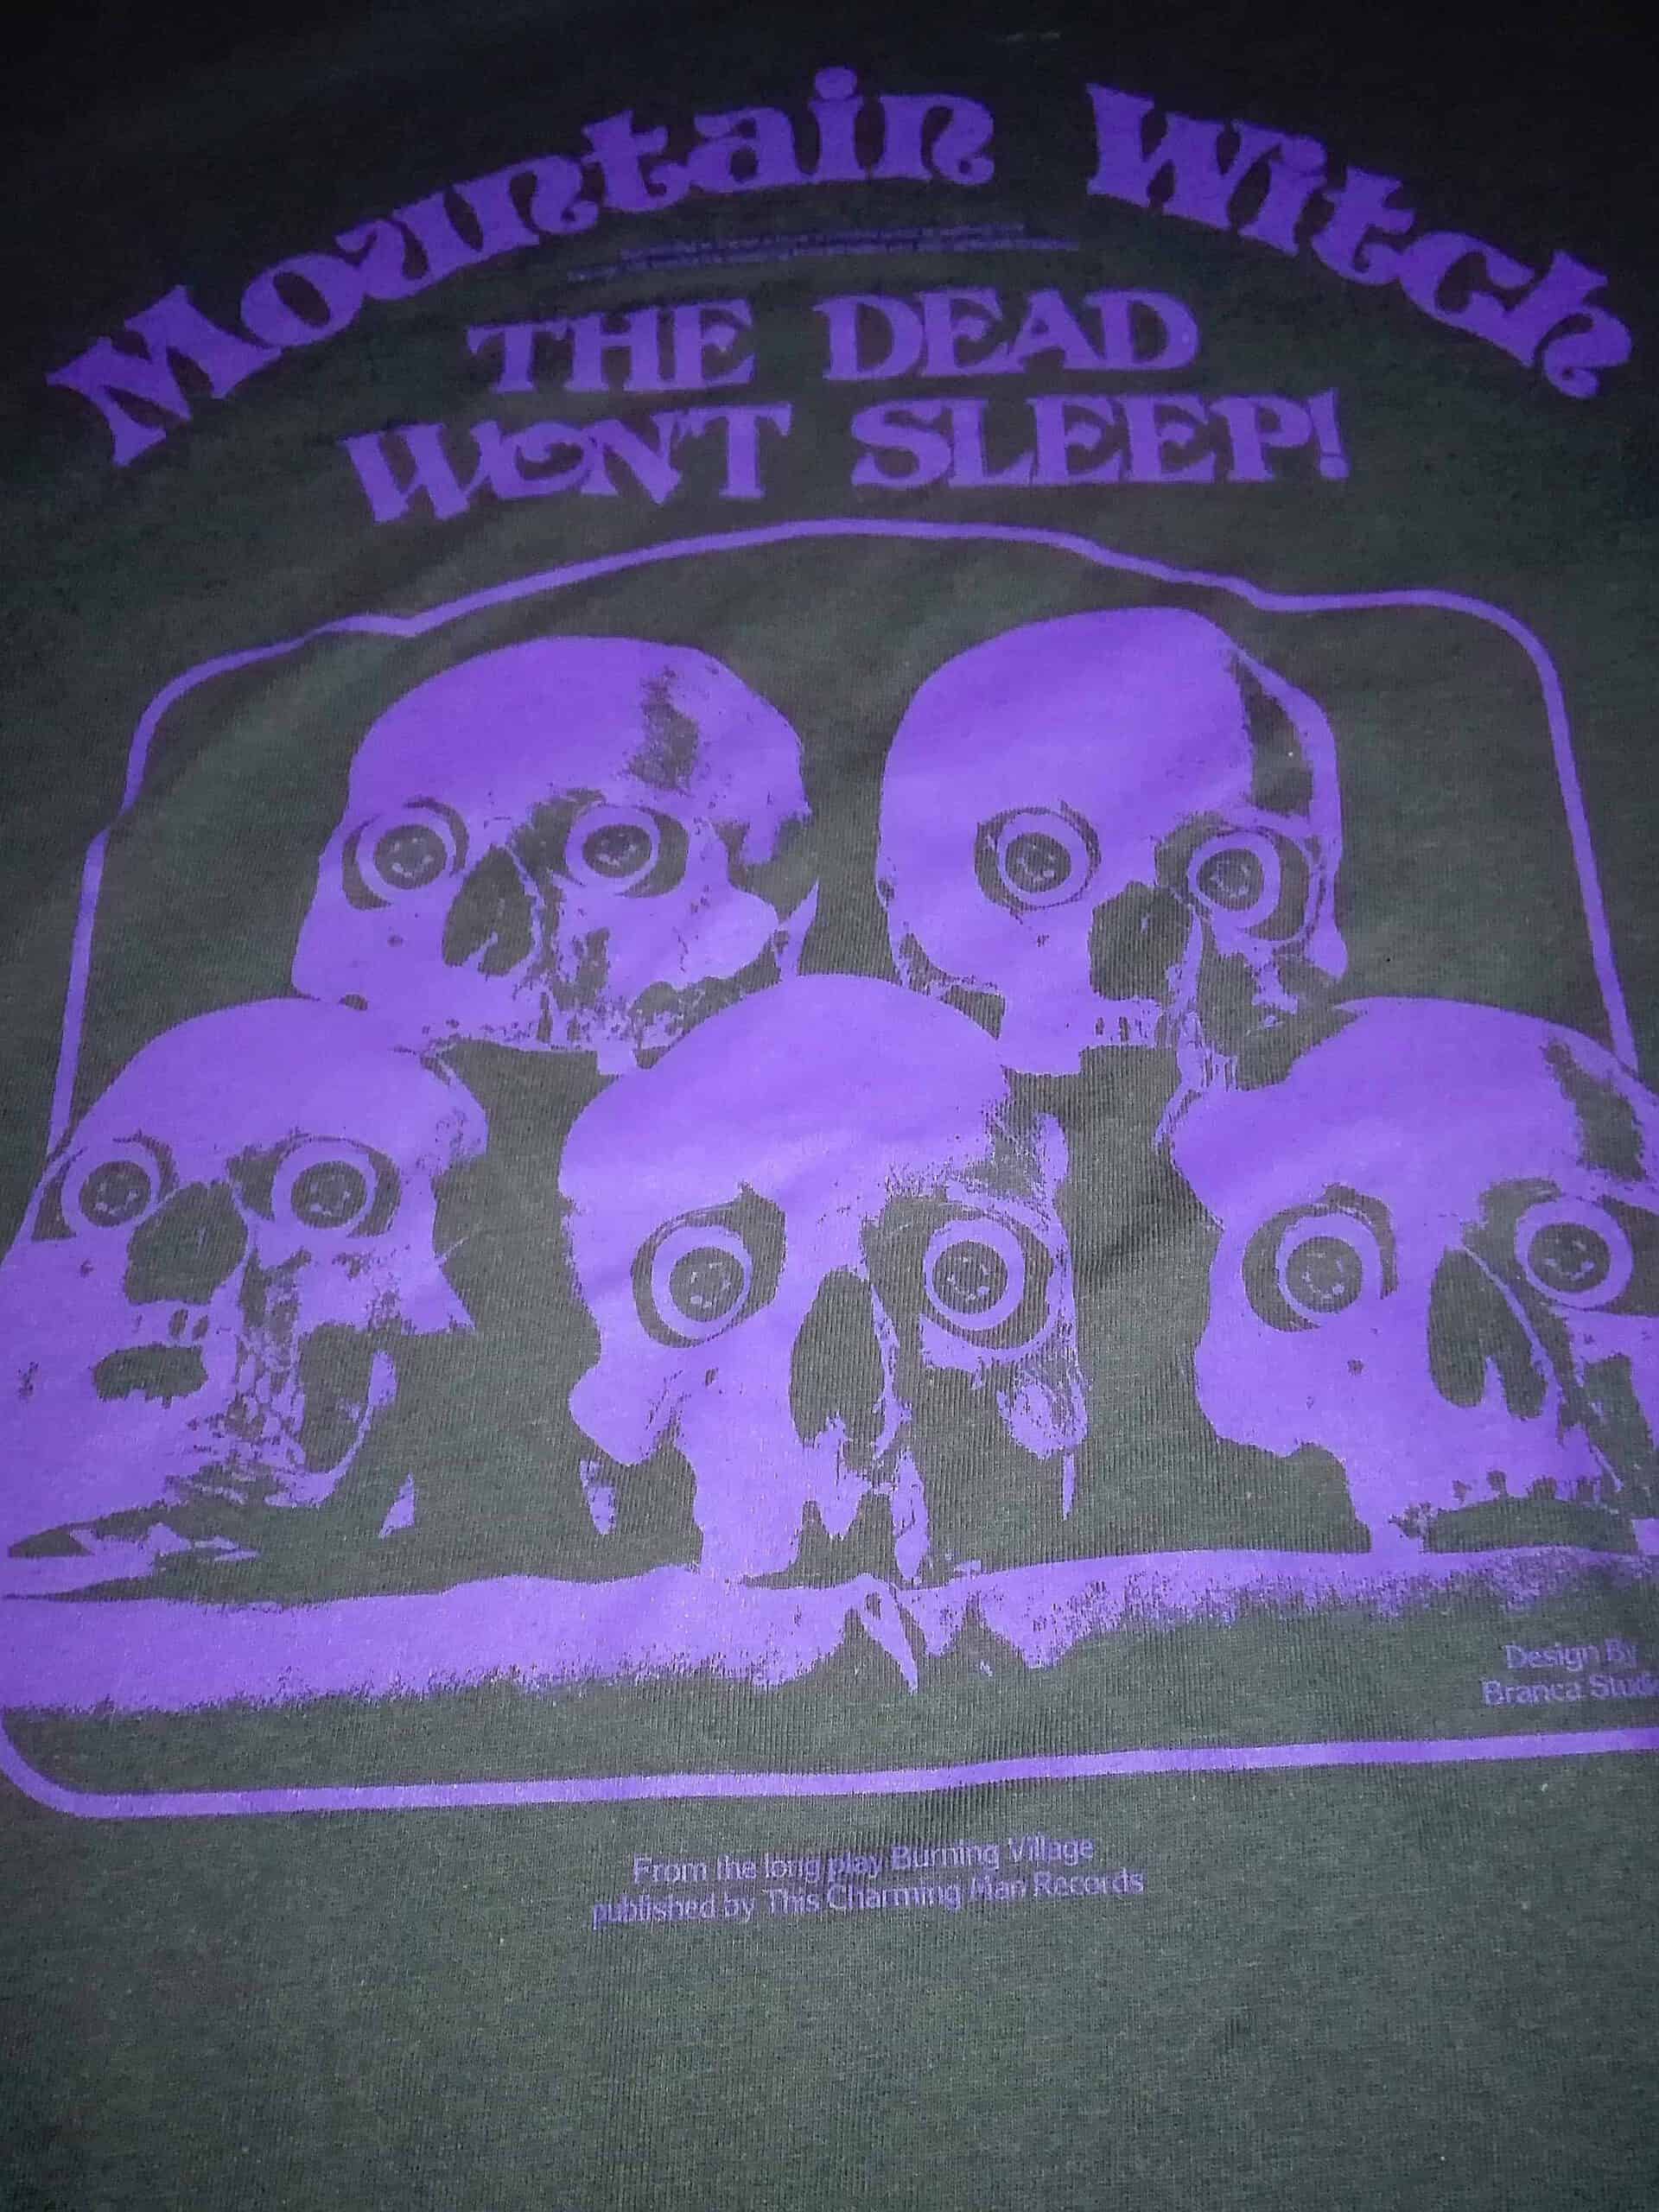 Mountain Witch - Dead Won't Sleep Shirt (exclusive TCM) Exclusive TCM coulourway! only 40 copies!